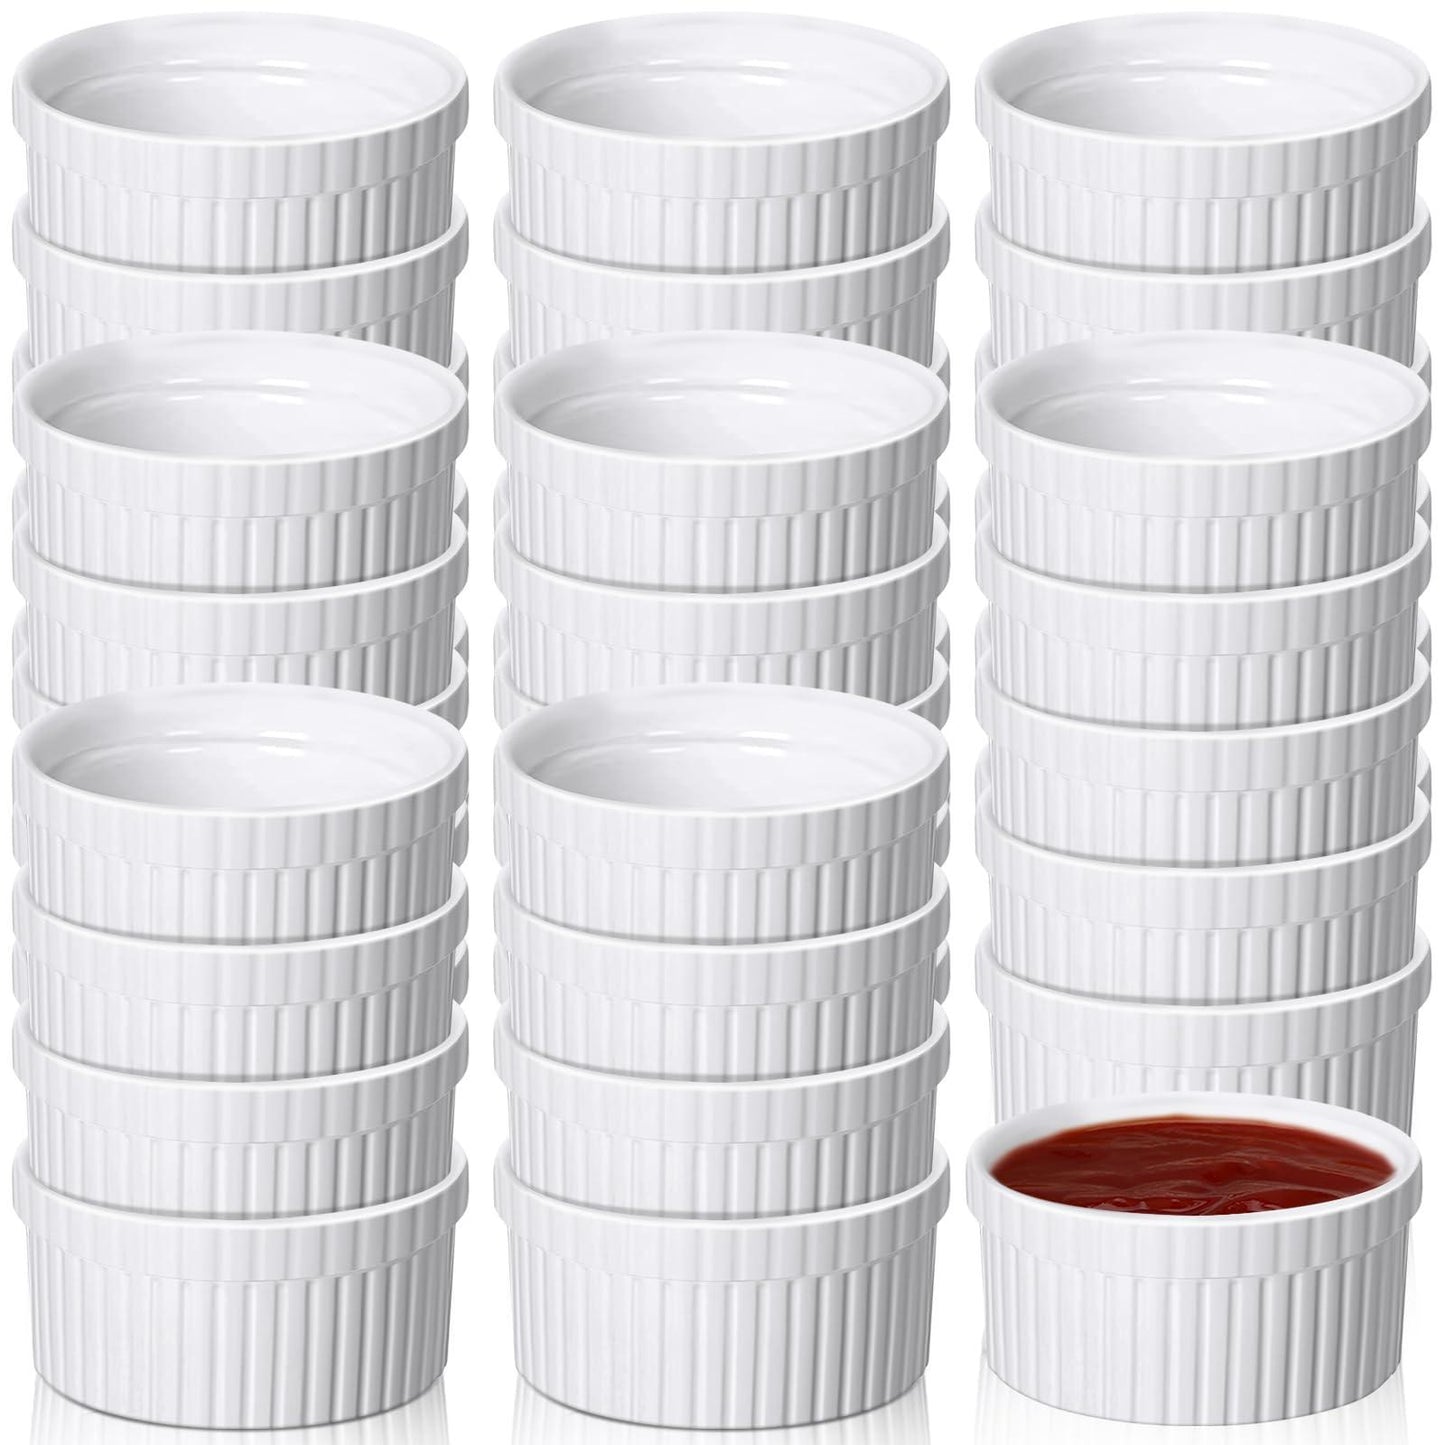 Ziliny 36 Pack Mini Ramekins 2 oz Porcelain Souffle Oven Dishwasher Safe Small Ceramic Baking Dipping Sauce Ramekins for Charcuterie Board Creme Brulee Dishes Condiment Sauce Dipping Cups - CookCave